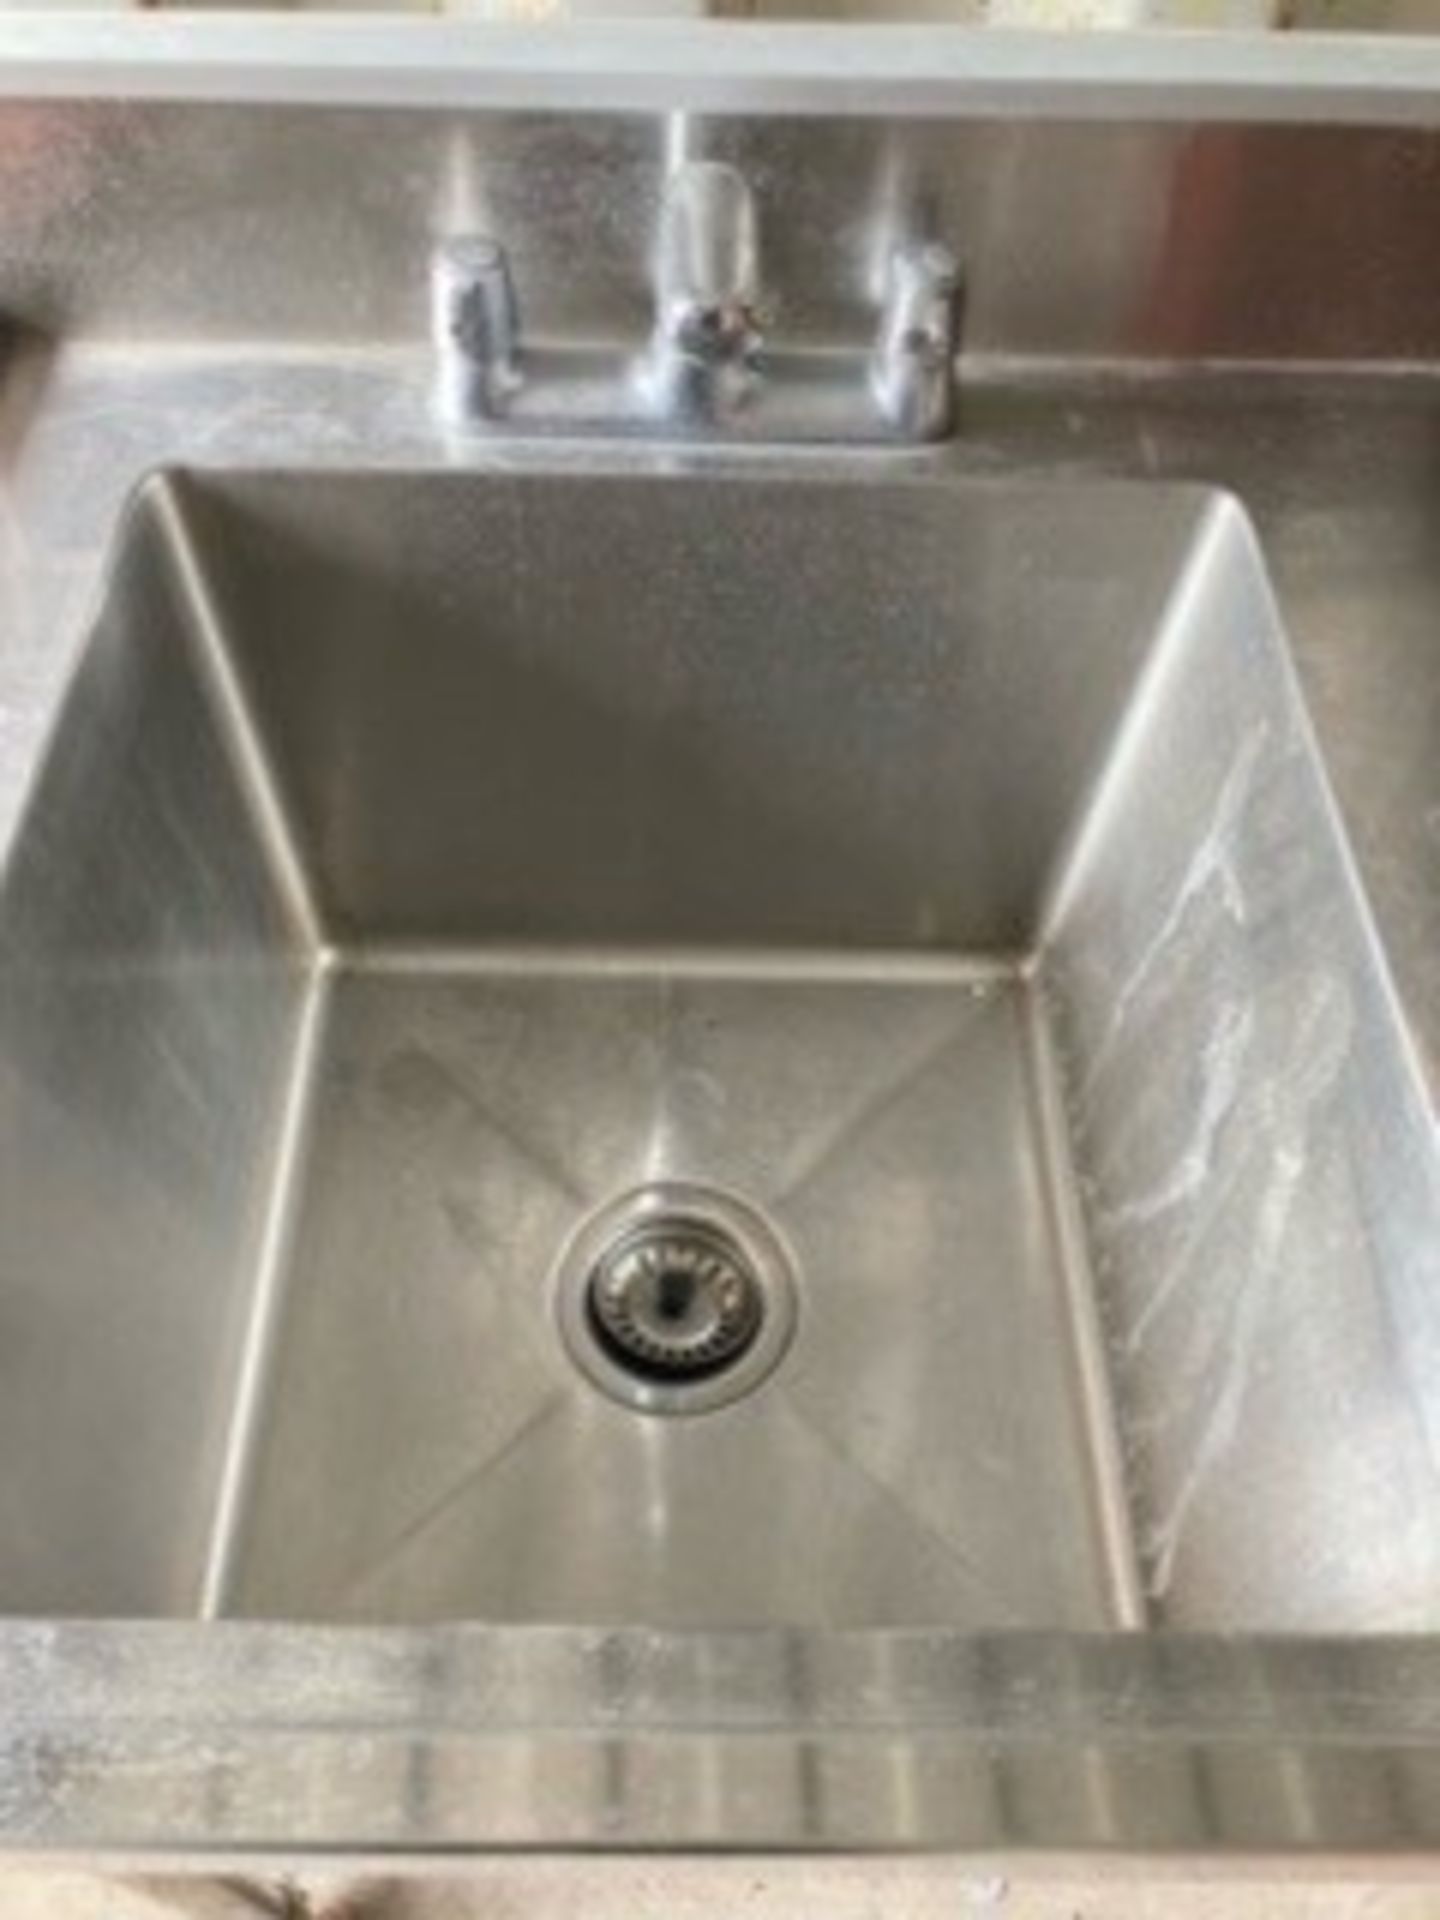 Simply Stainless Steel Sink Unit - Image 3 of 5